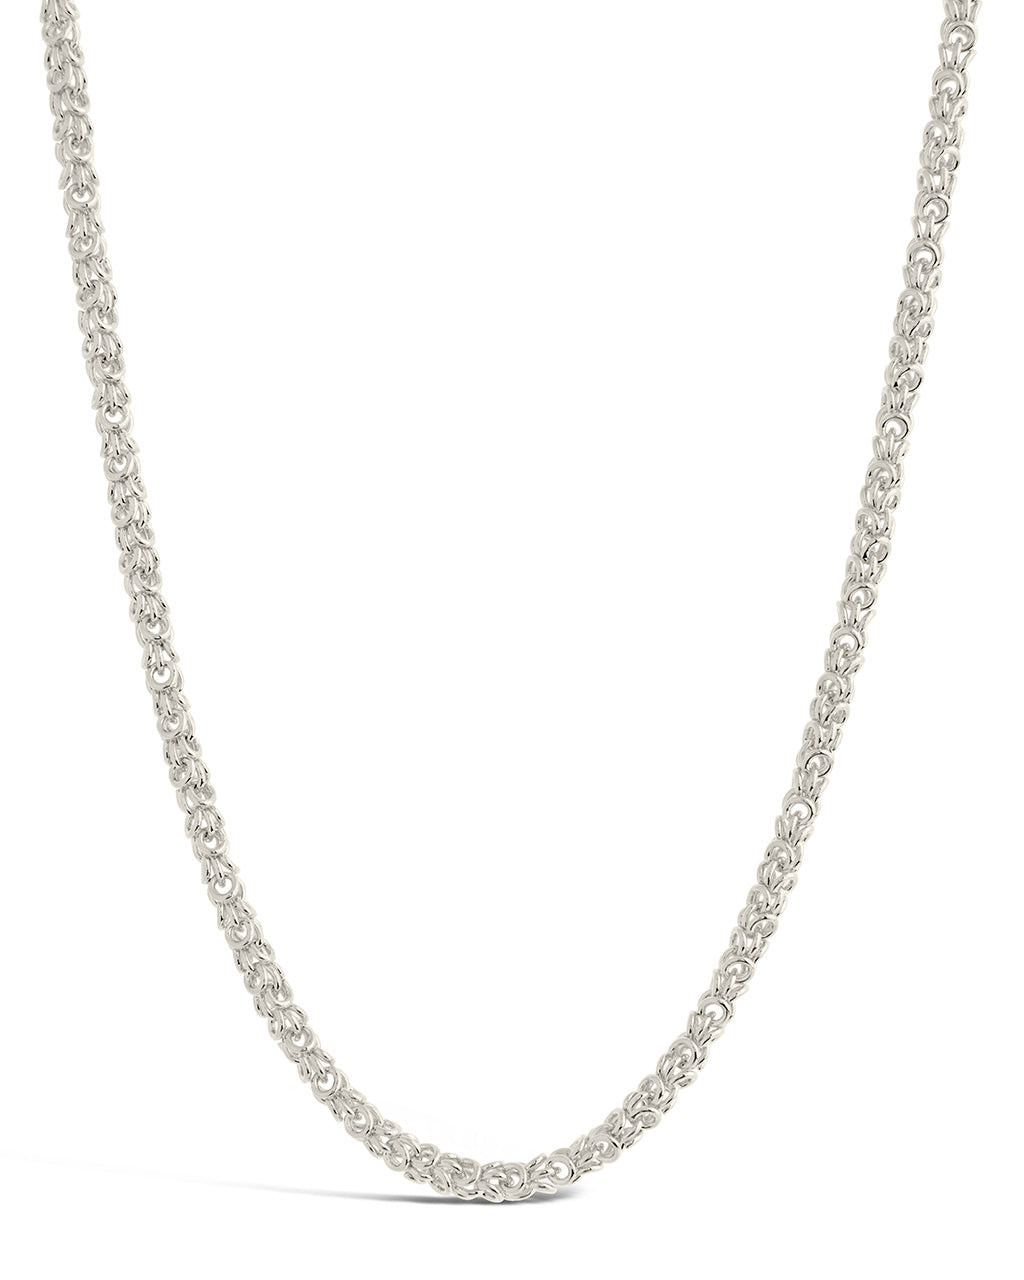 Moira Chain Necklace Sterling Forever 